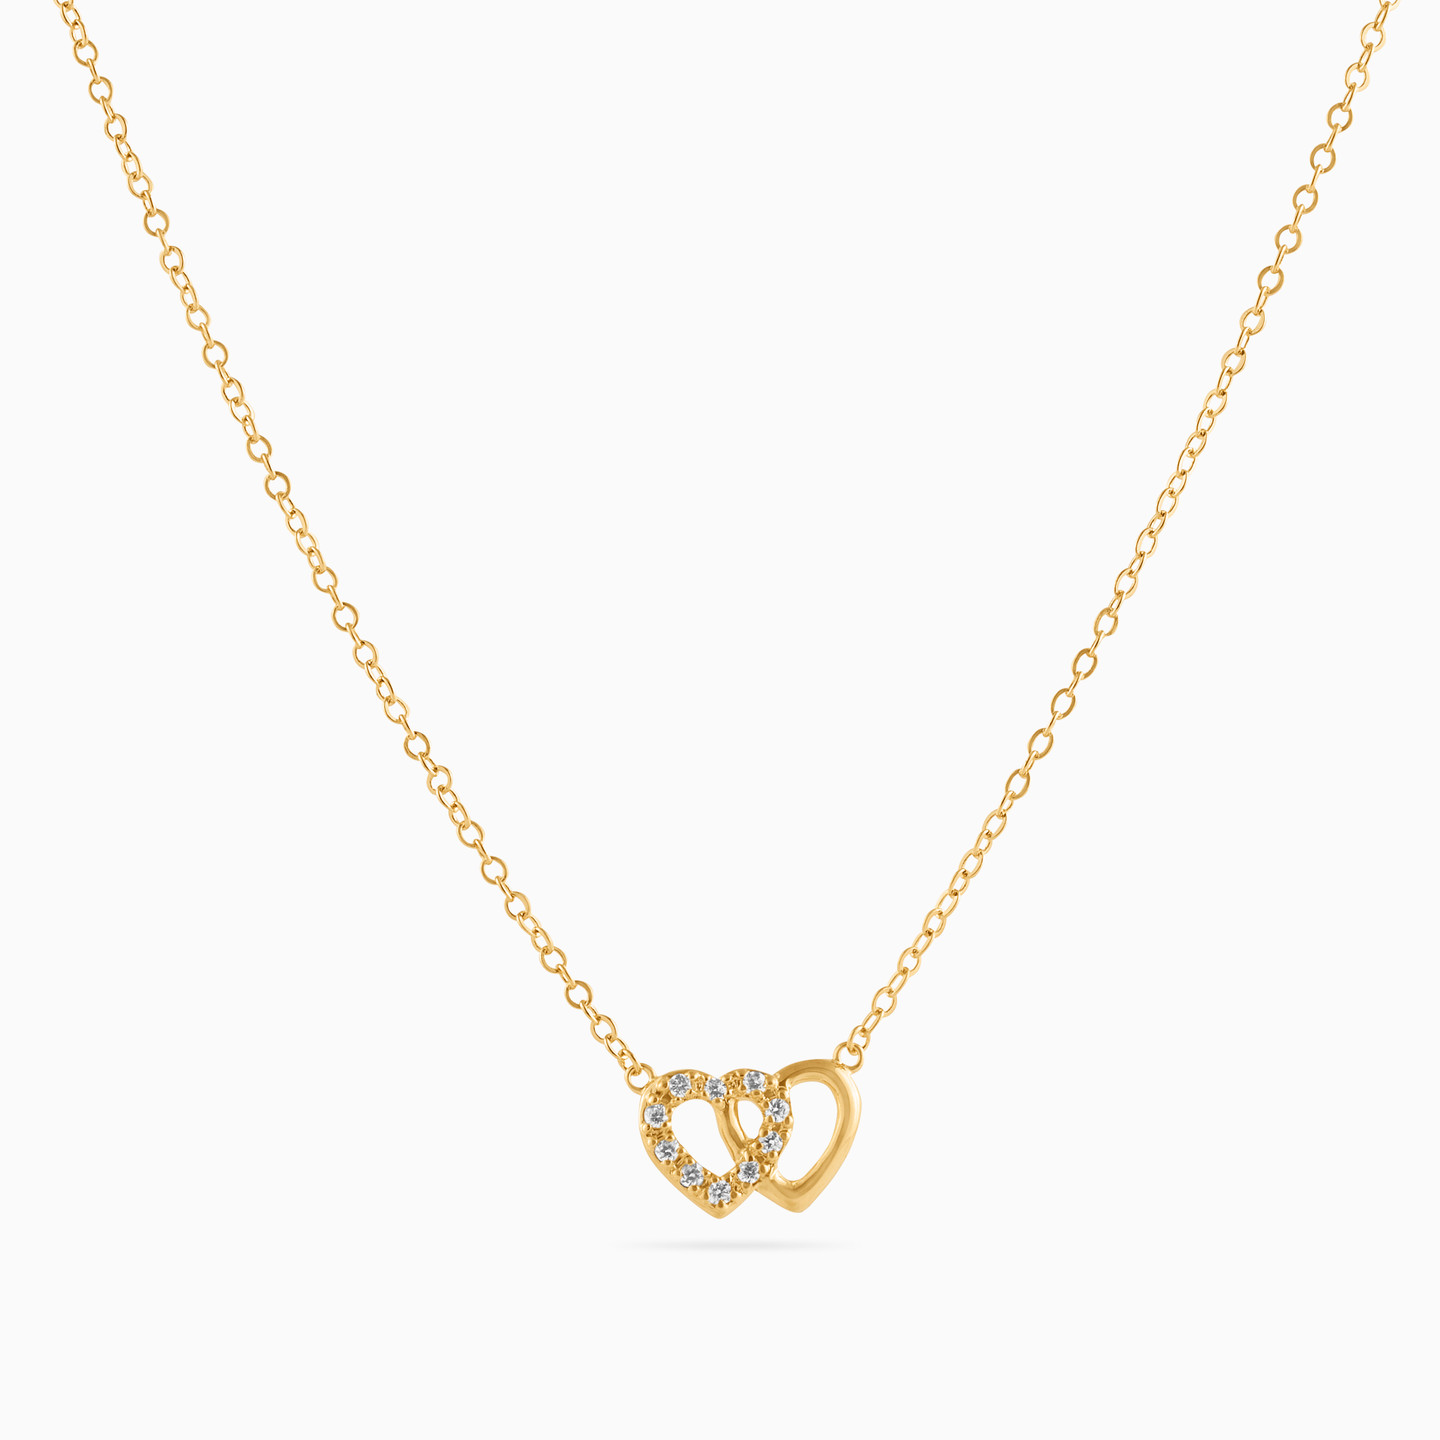 Gold Plated Cubic Zirconia Pendant Necklace - 3